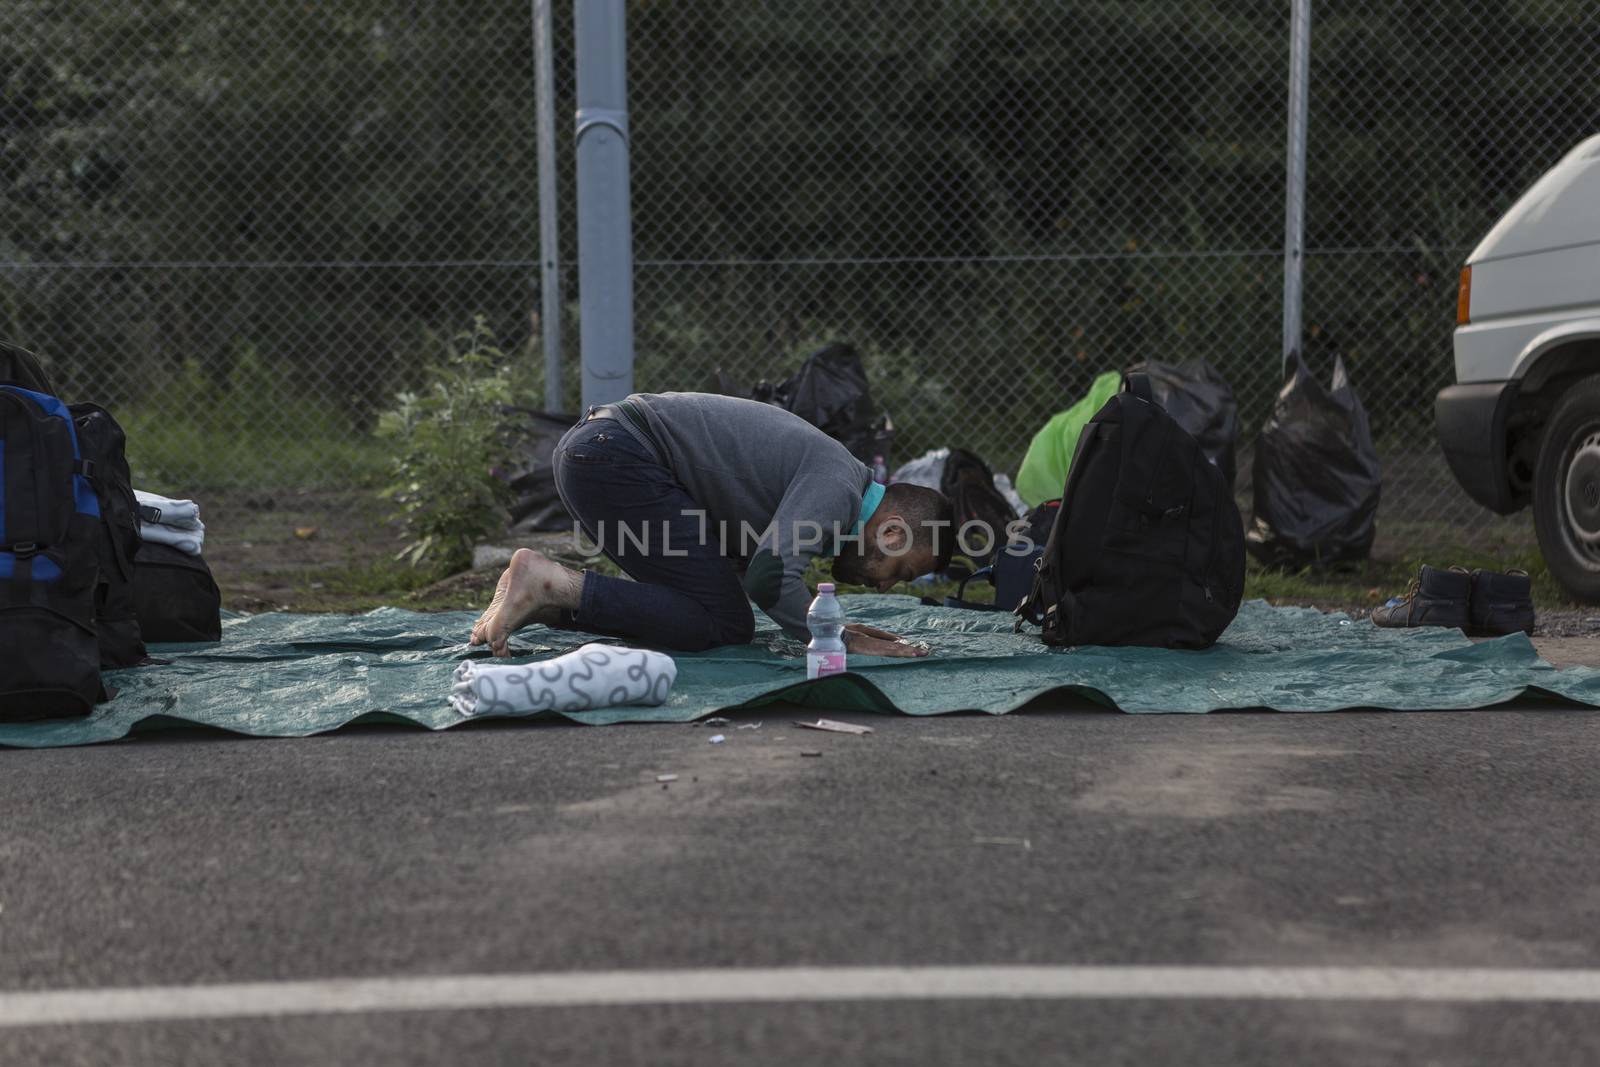 SERBIA, Horgos: A man prays at the Serbia-Hungary border after Hungary closed the border crossing on September 16, 2015.****Restriction: Photo is not to be sold in Russia or Asia****